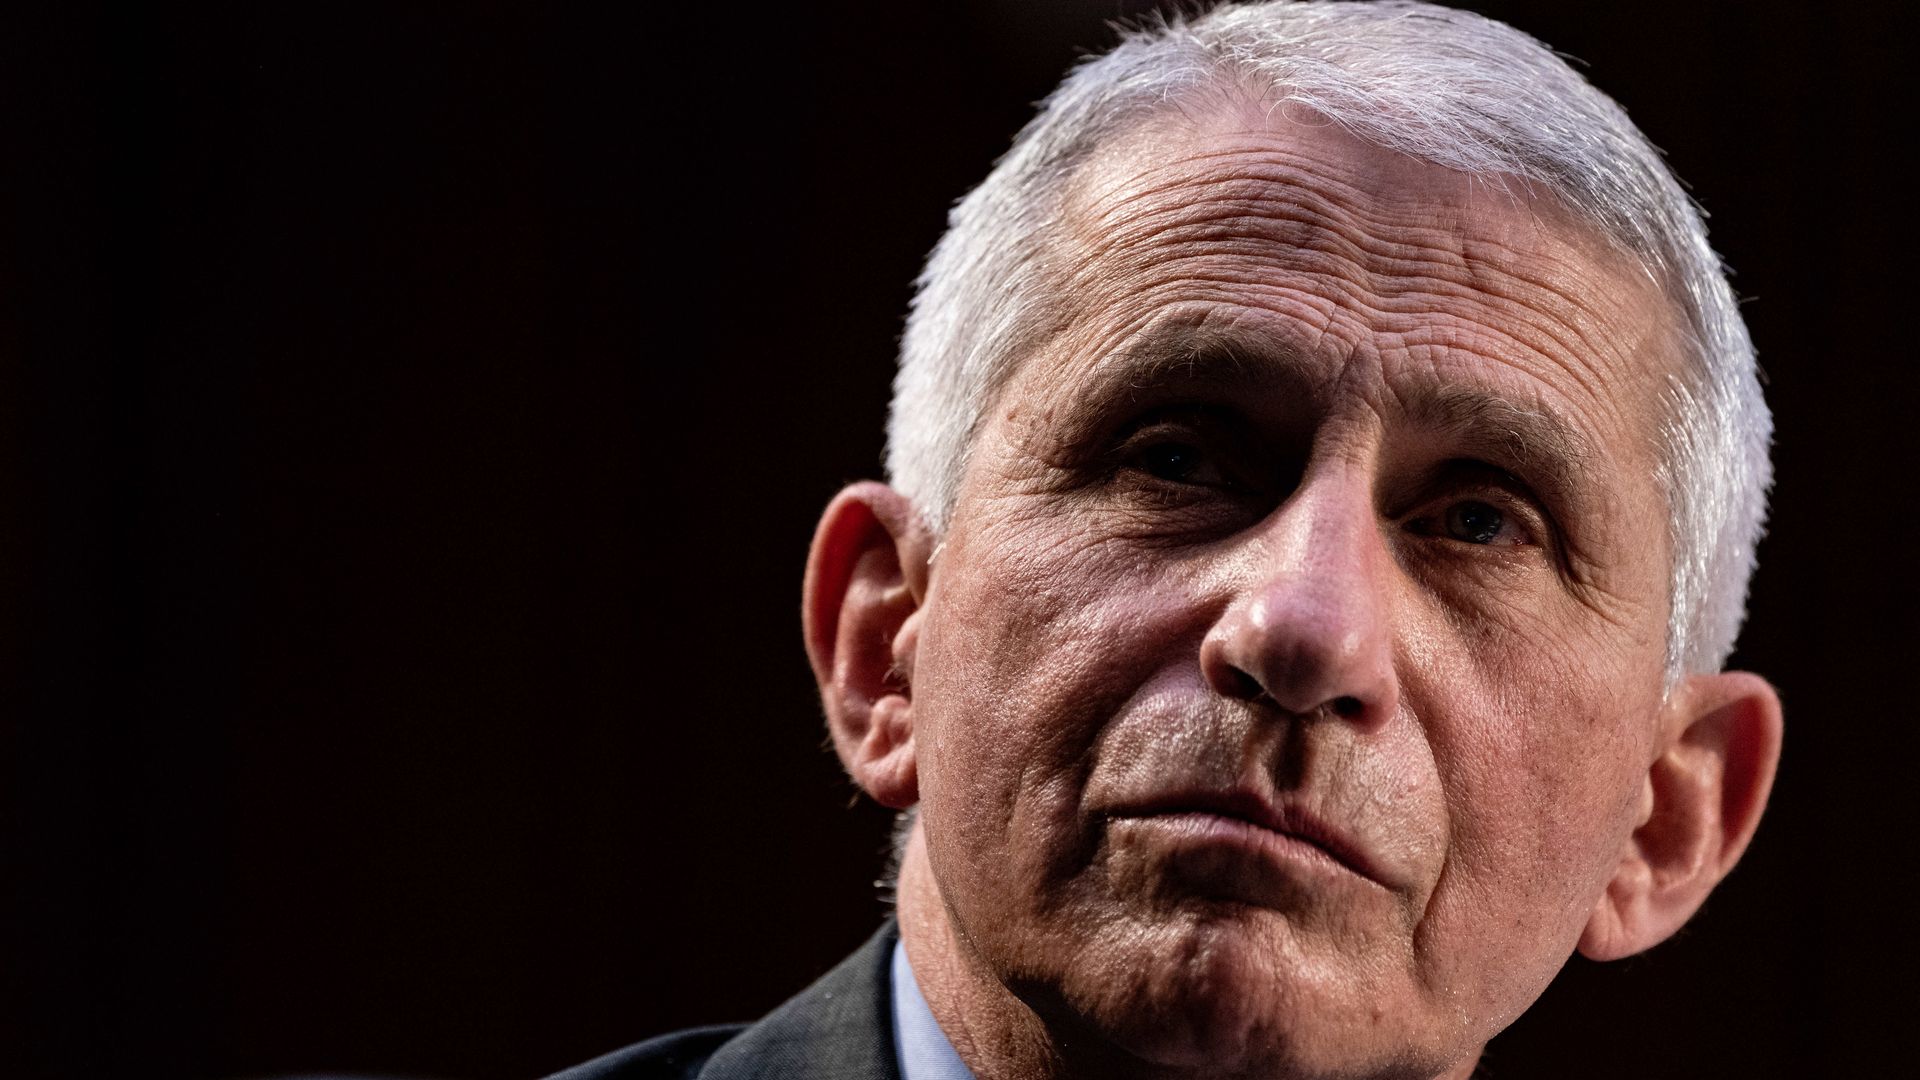 Anthony Fauci during a Senate hearing committee on March 18.